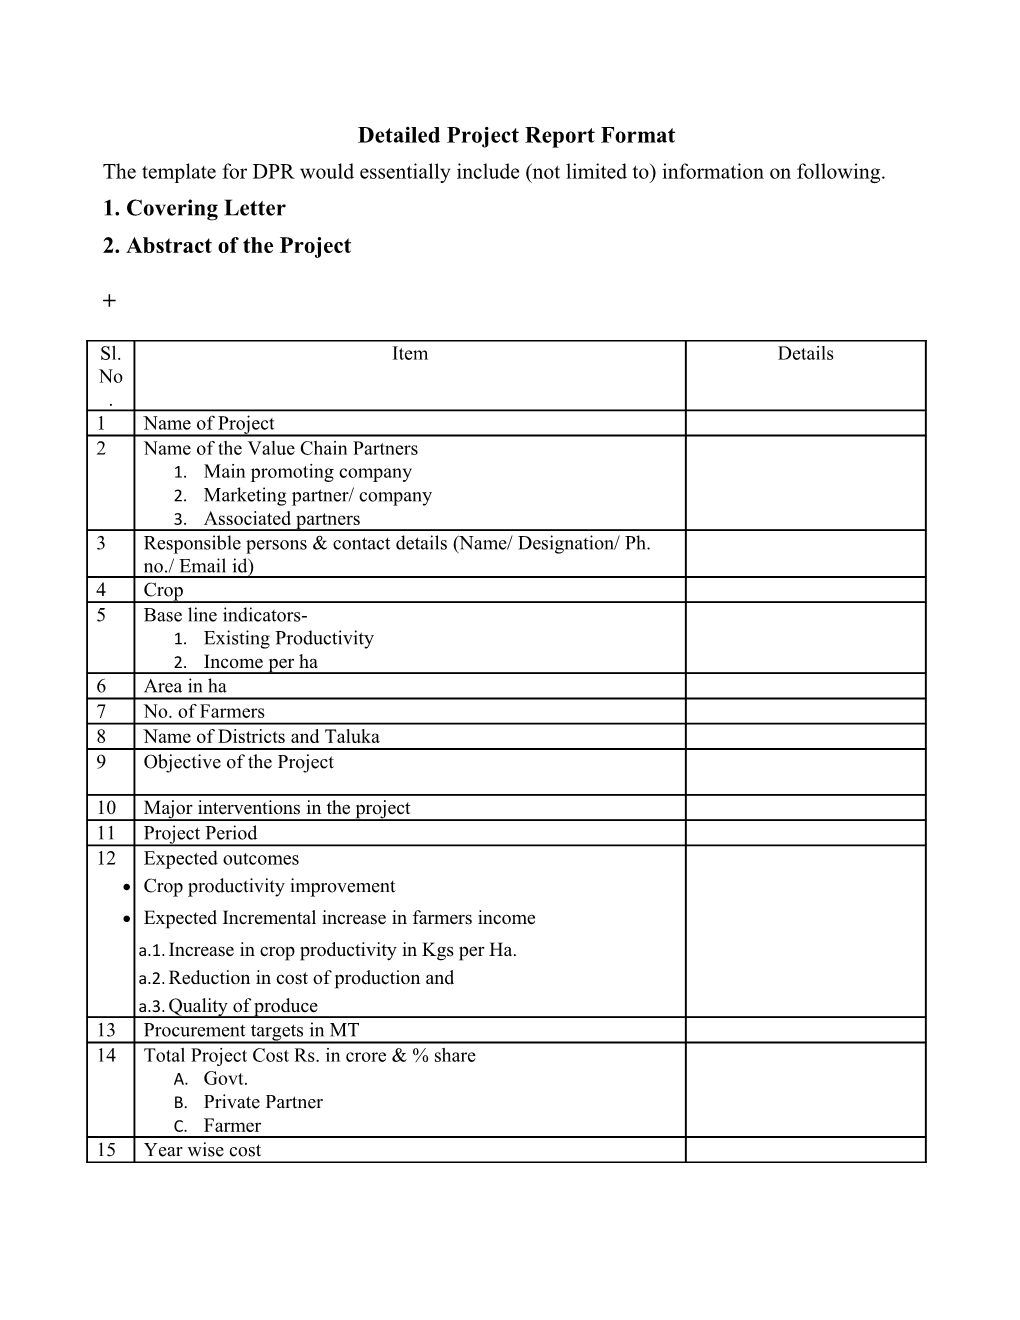 Detailed Project Report Format